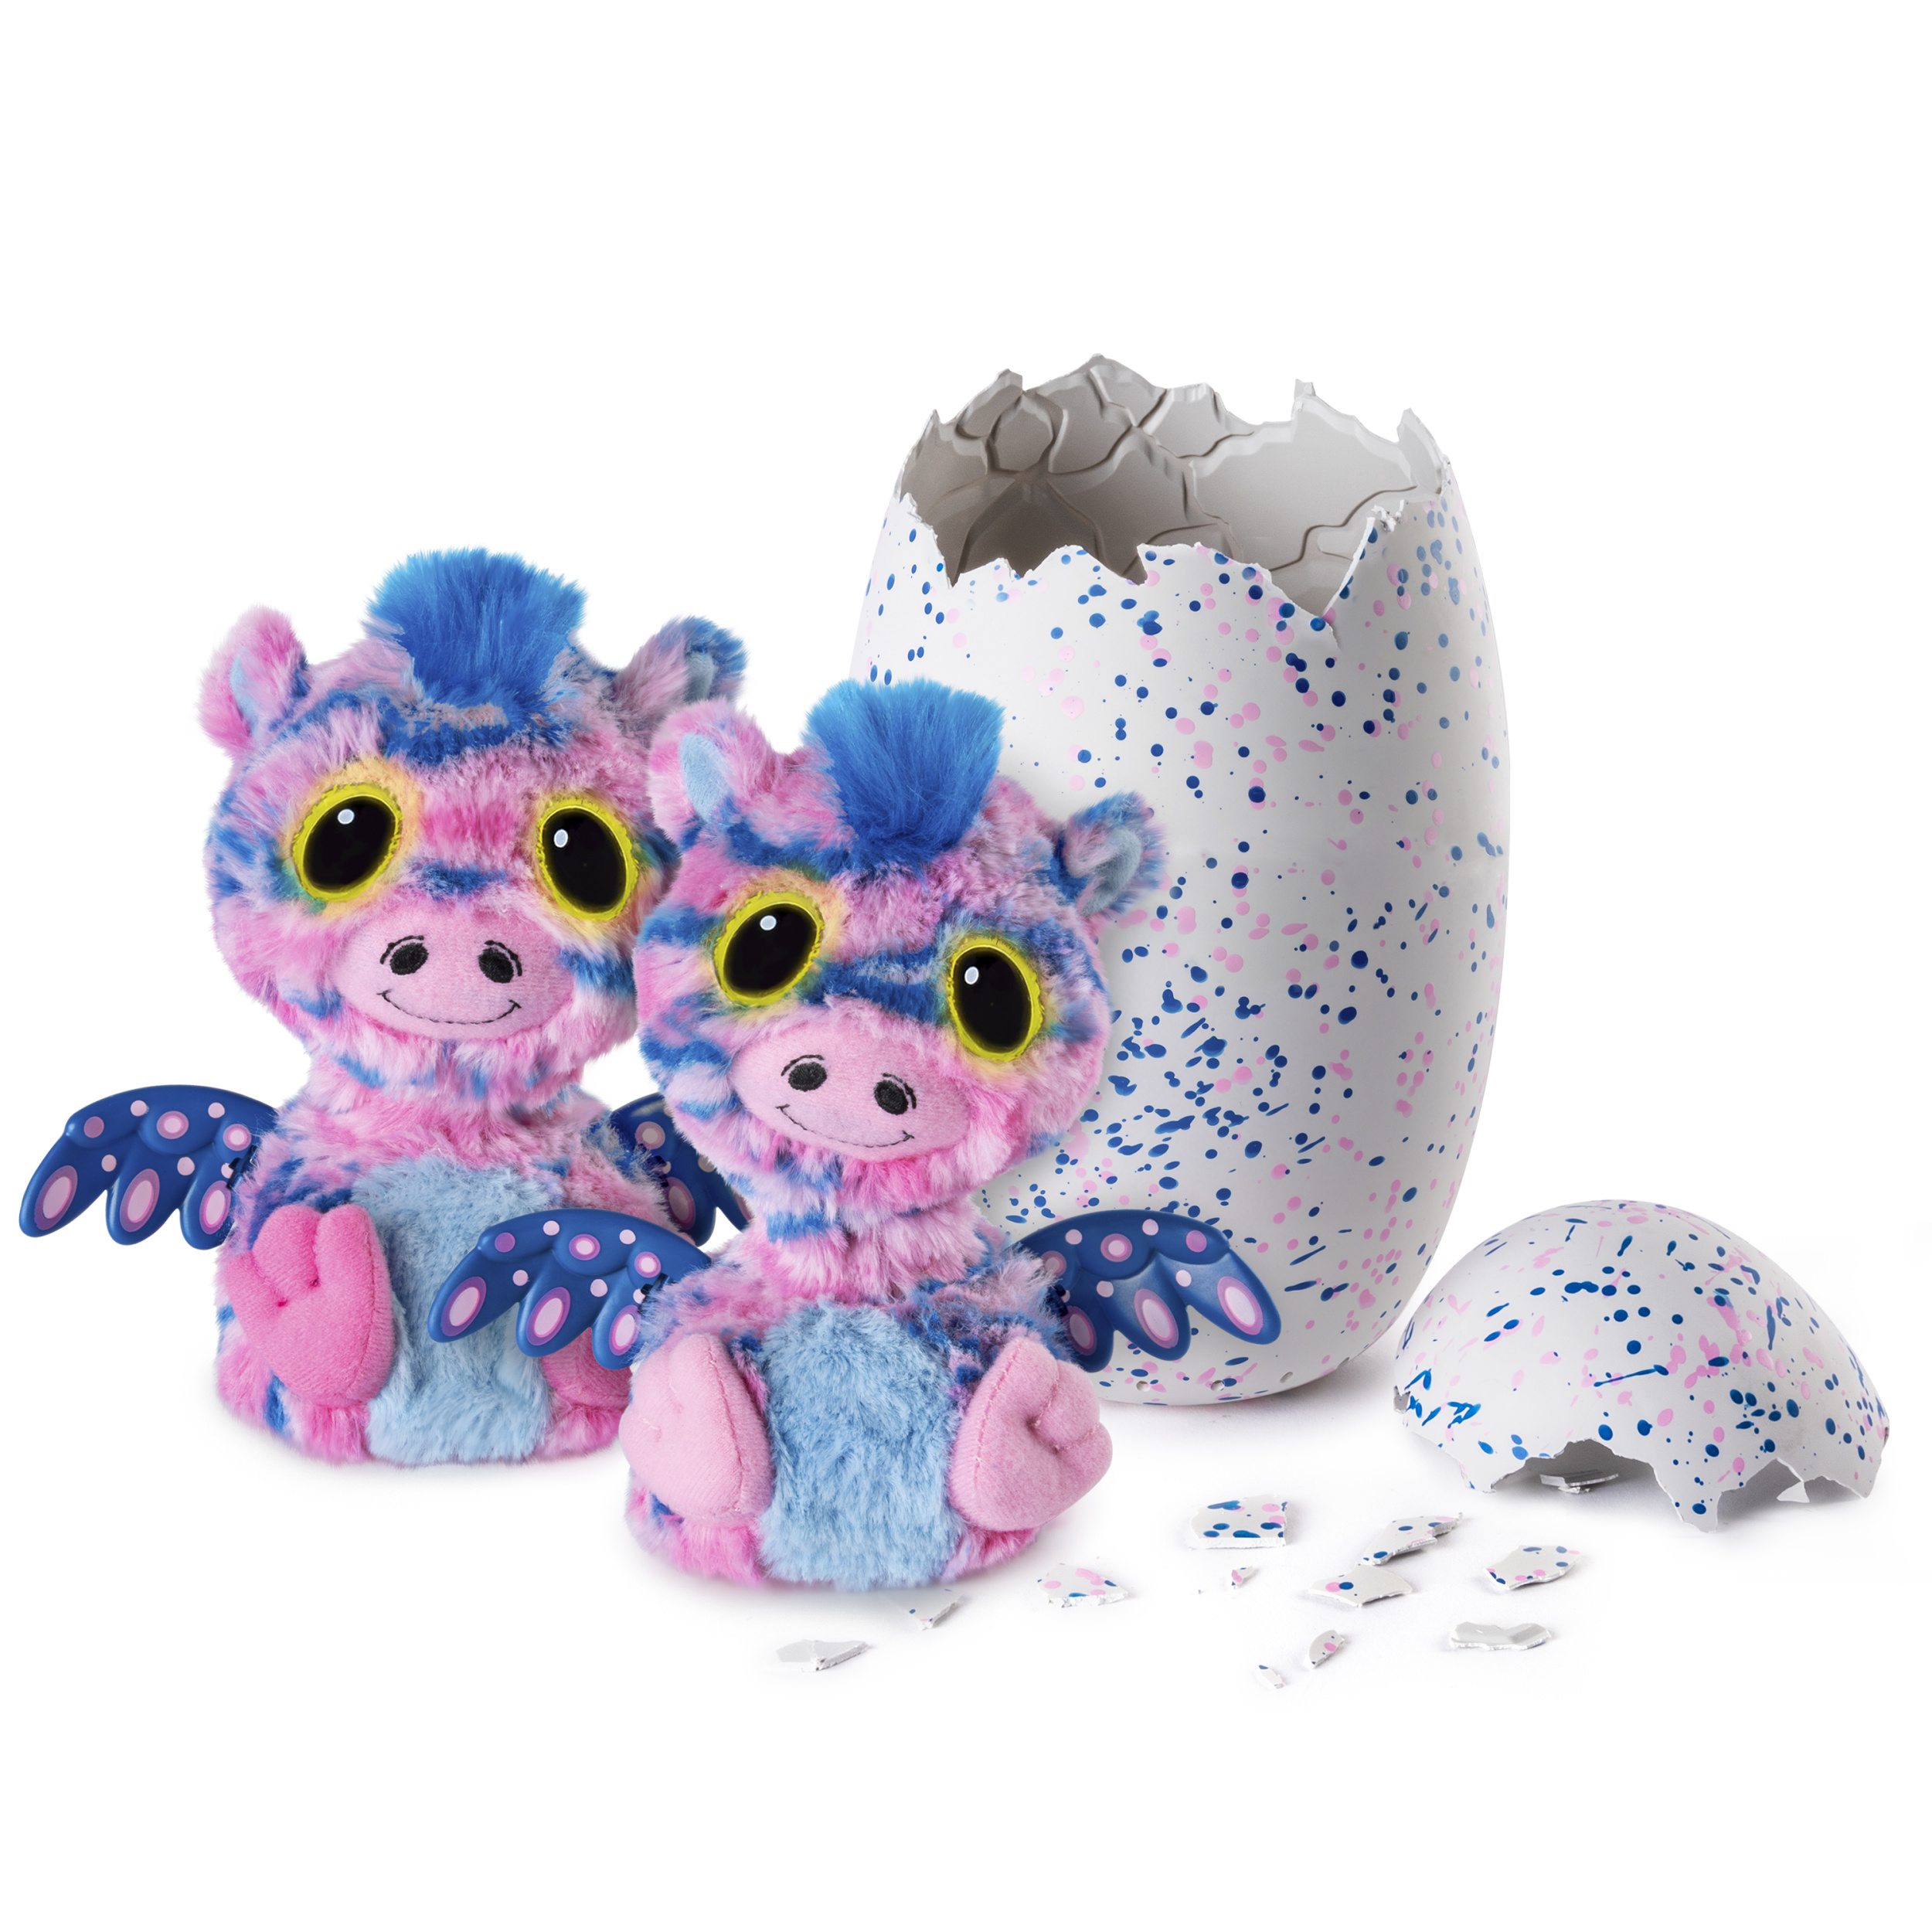 Hatchimals Surprise ? Zuffin ? Hatching Egg with Surprise Twin Interactive Hatchimal Creatures and Bracelet Accessory by Spin Master, Available Exclusively at Walmart - image 3 of 8